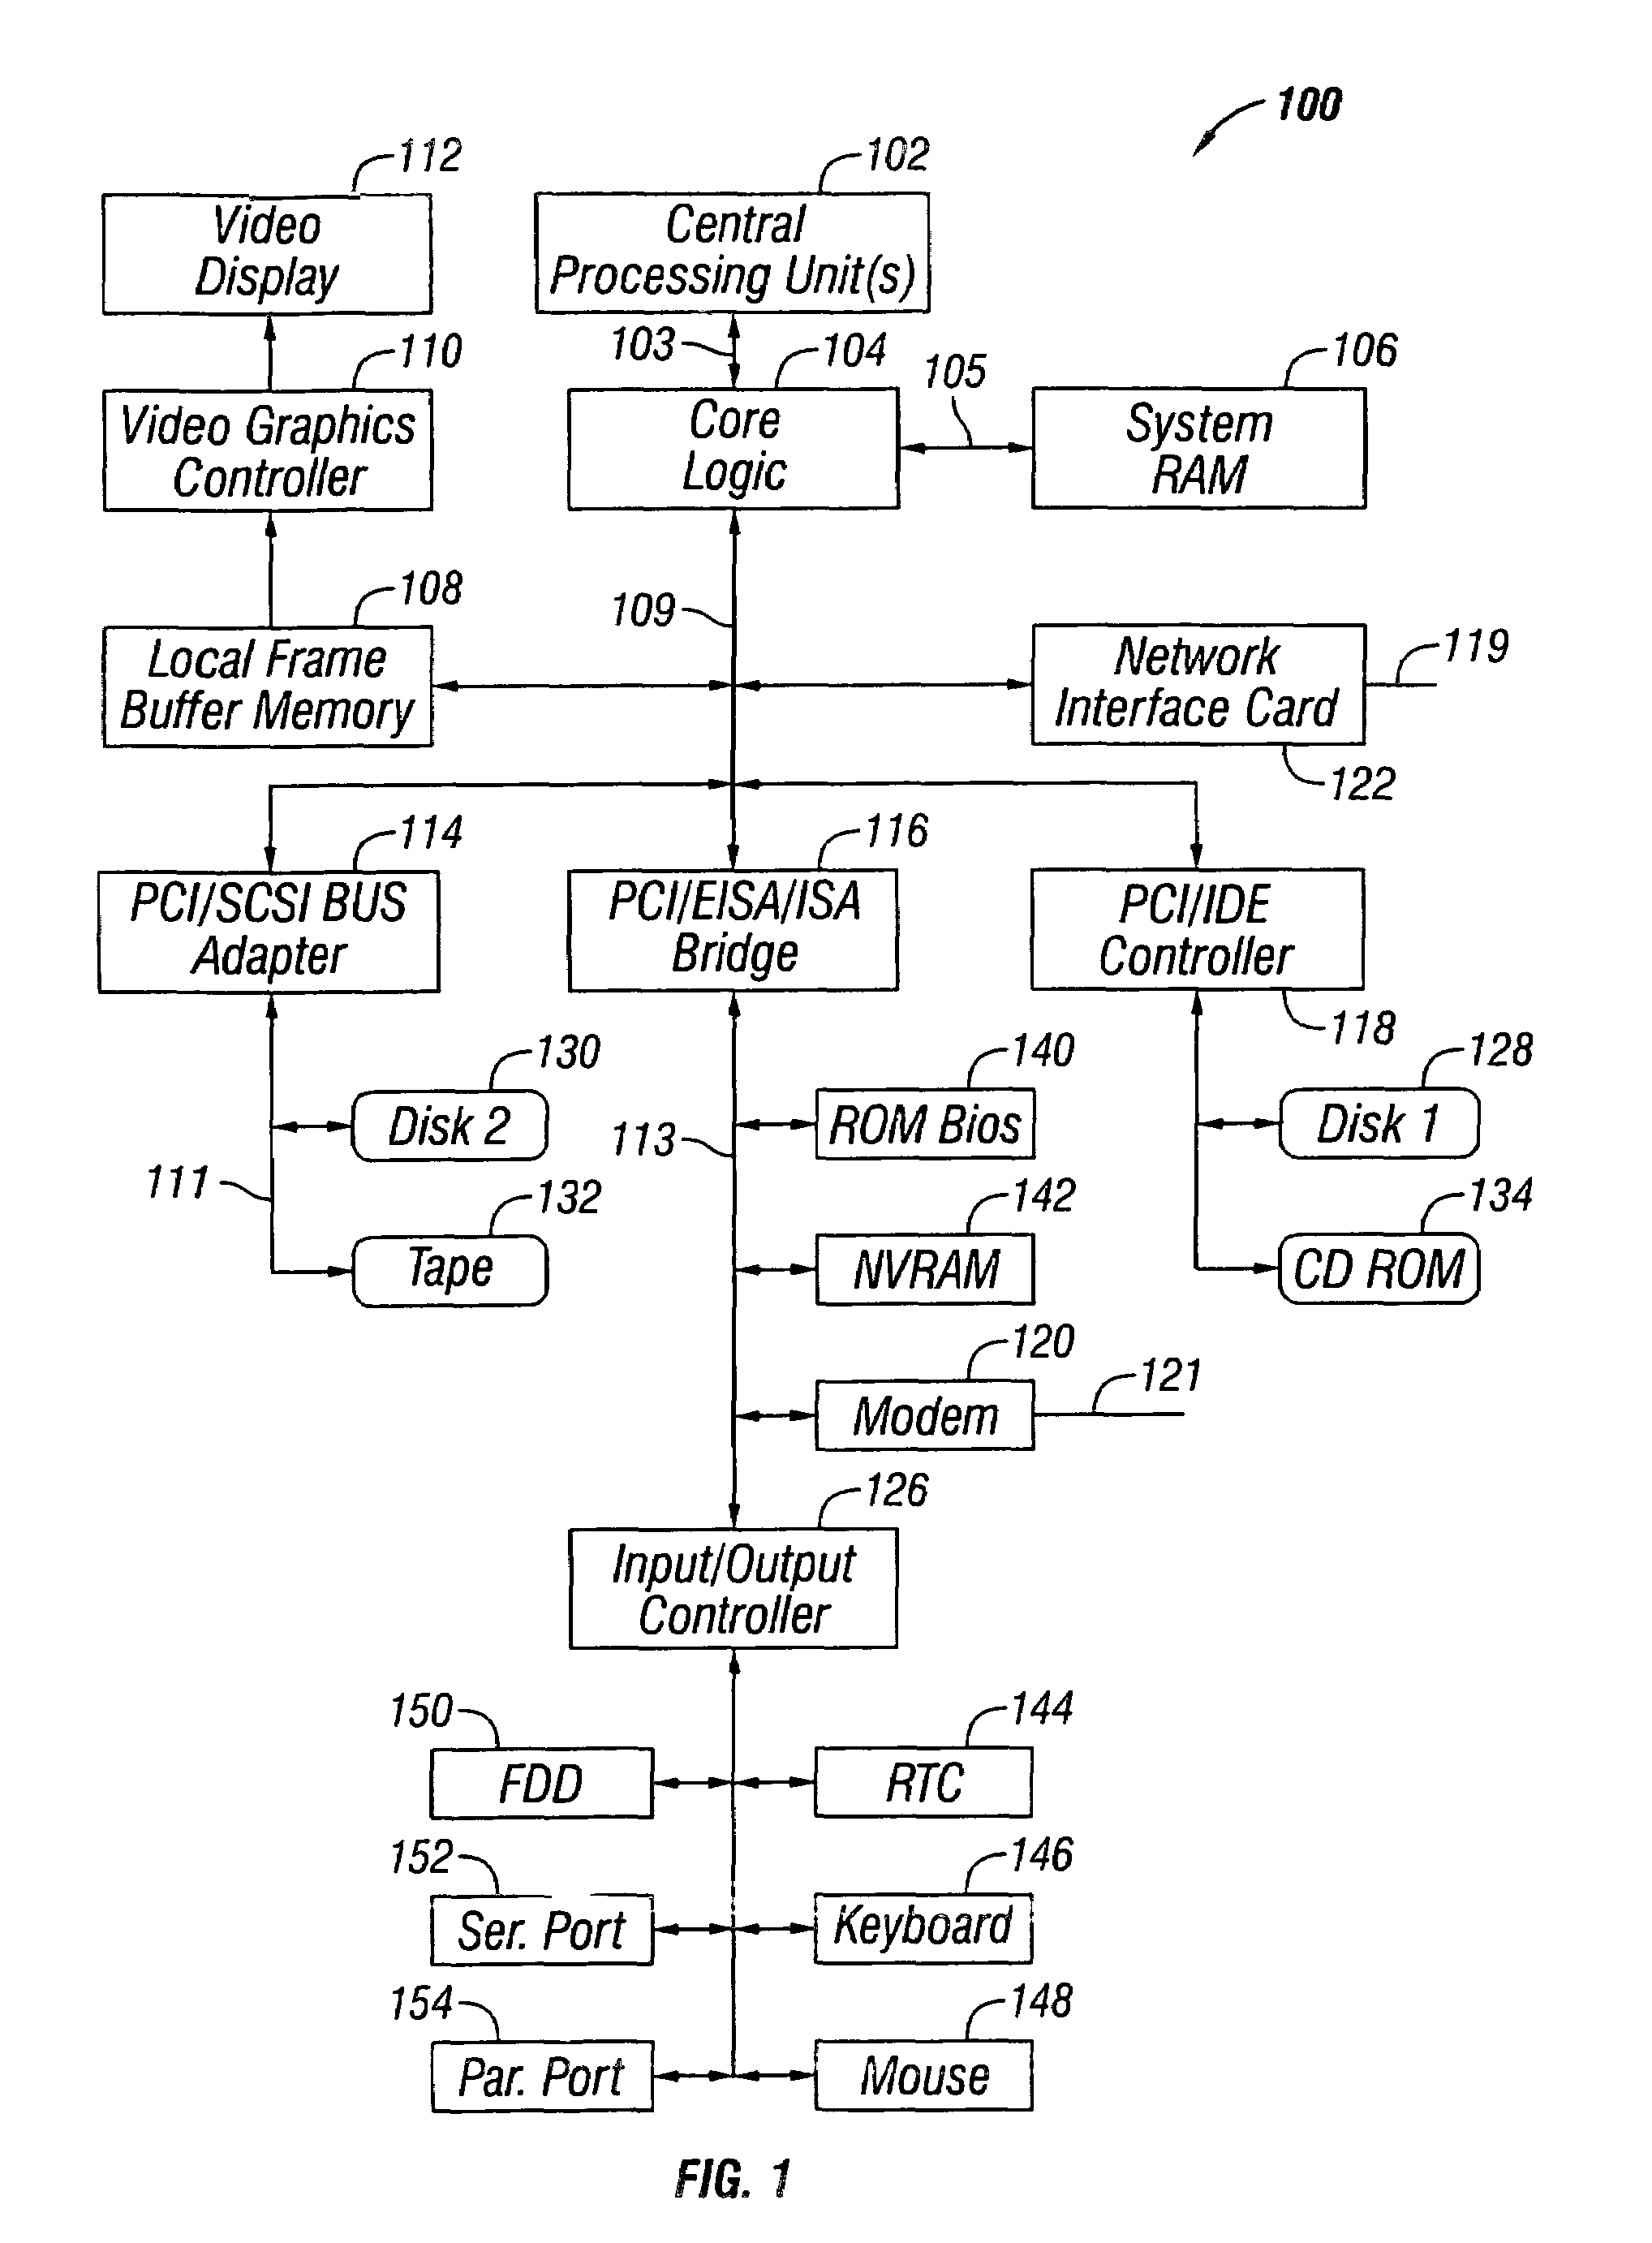 Point-to-point electrical loading for a multi-drop bus